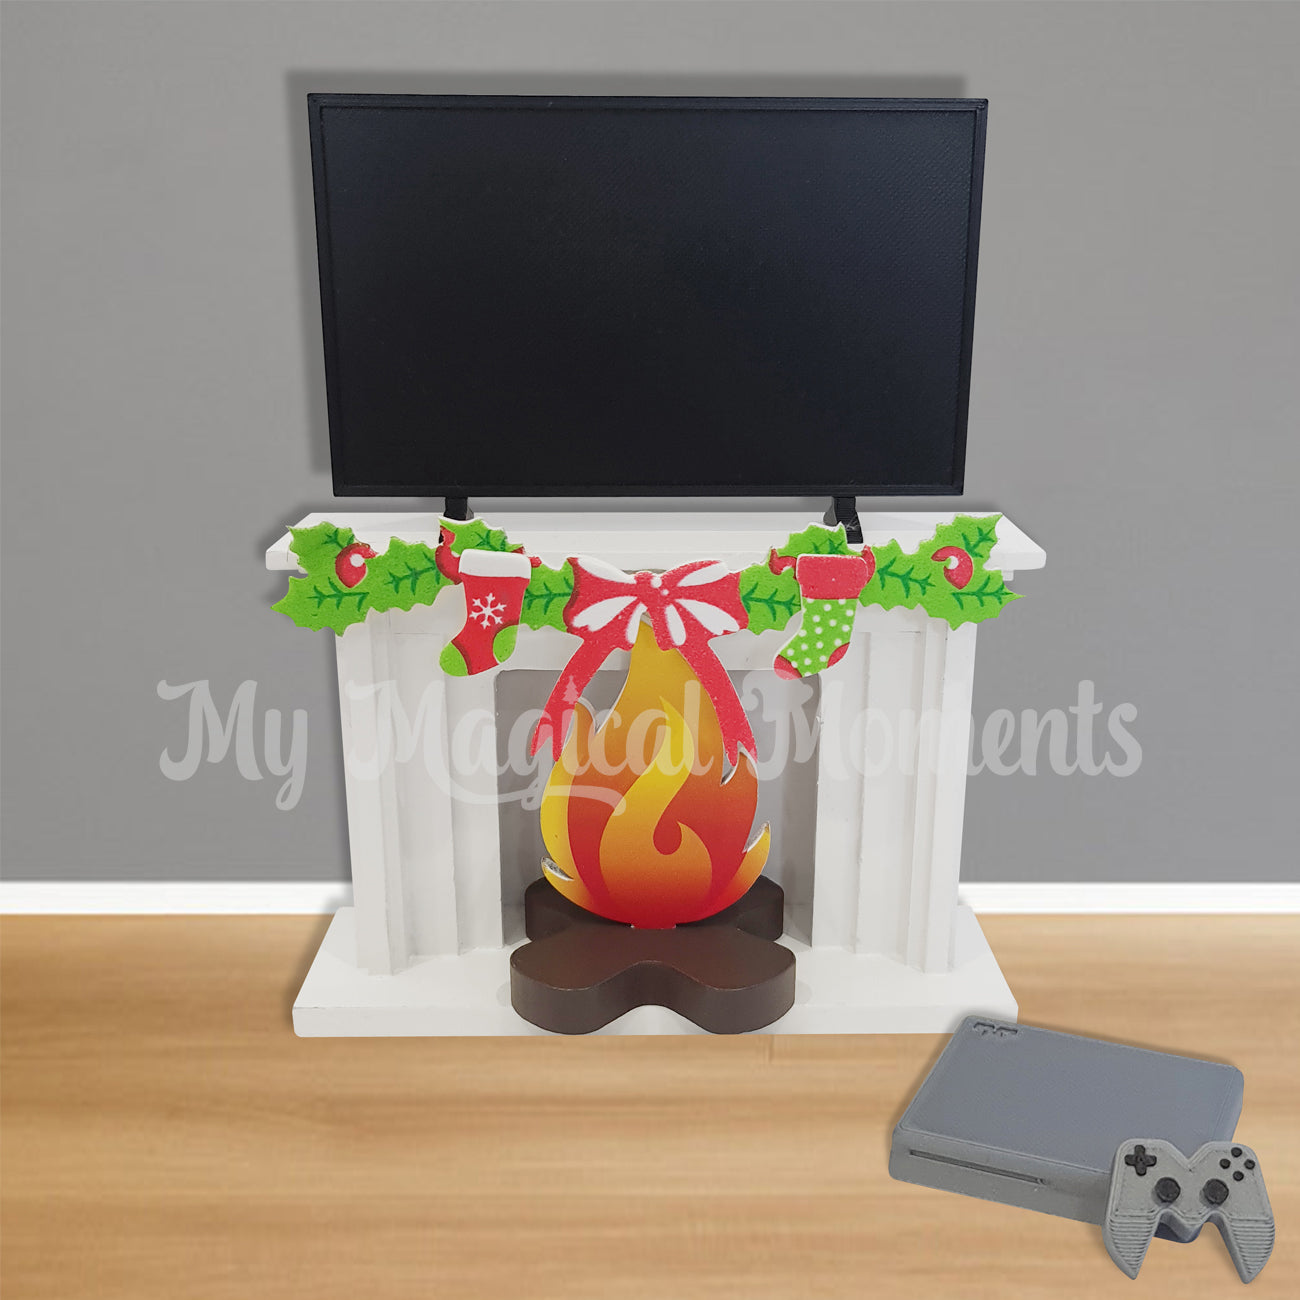 Tv Room scene, television sitting on a miniature fireplace, with a gaming console prop